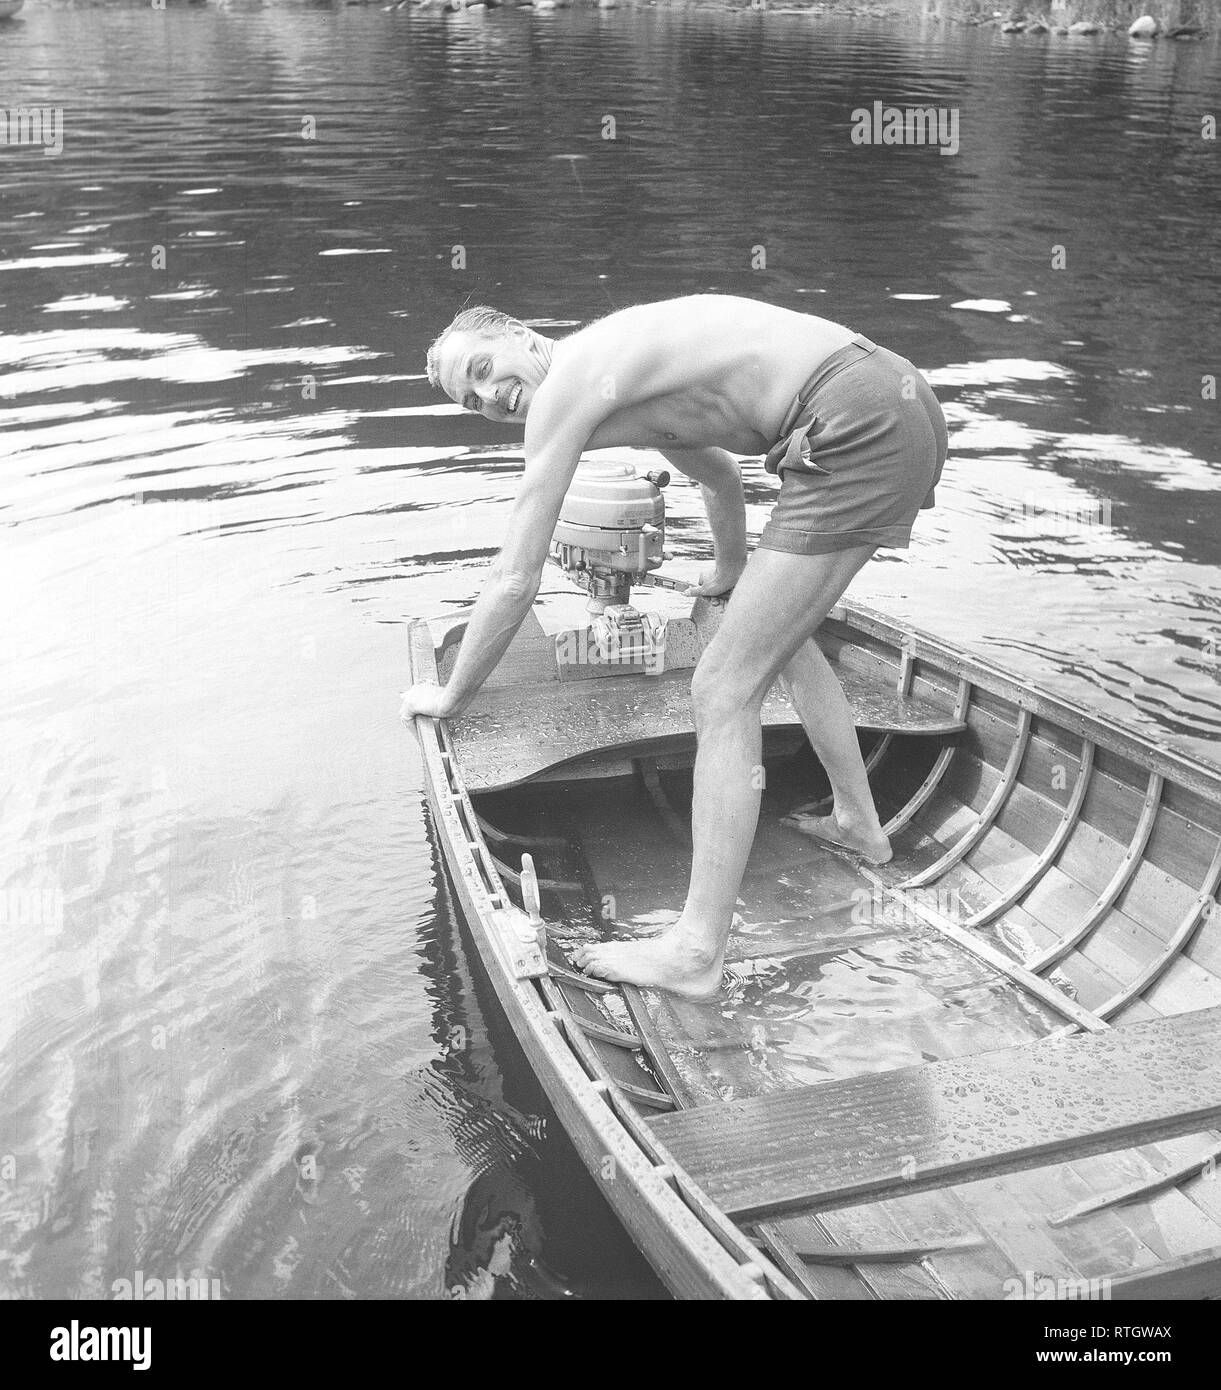 Boatlife in the 1950s. A man is trying to start the outboard engine on his boat. He also needs to empty it from the rain water as it is full of it. His name is Gustaf Wally, 1905-1966. Cousin to swedish diplomat Raoul Wallenberg who disappeared in Hungary 1945. Photo Kristoffersson ref BX20-7 Sweden 1950s Stock Photo